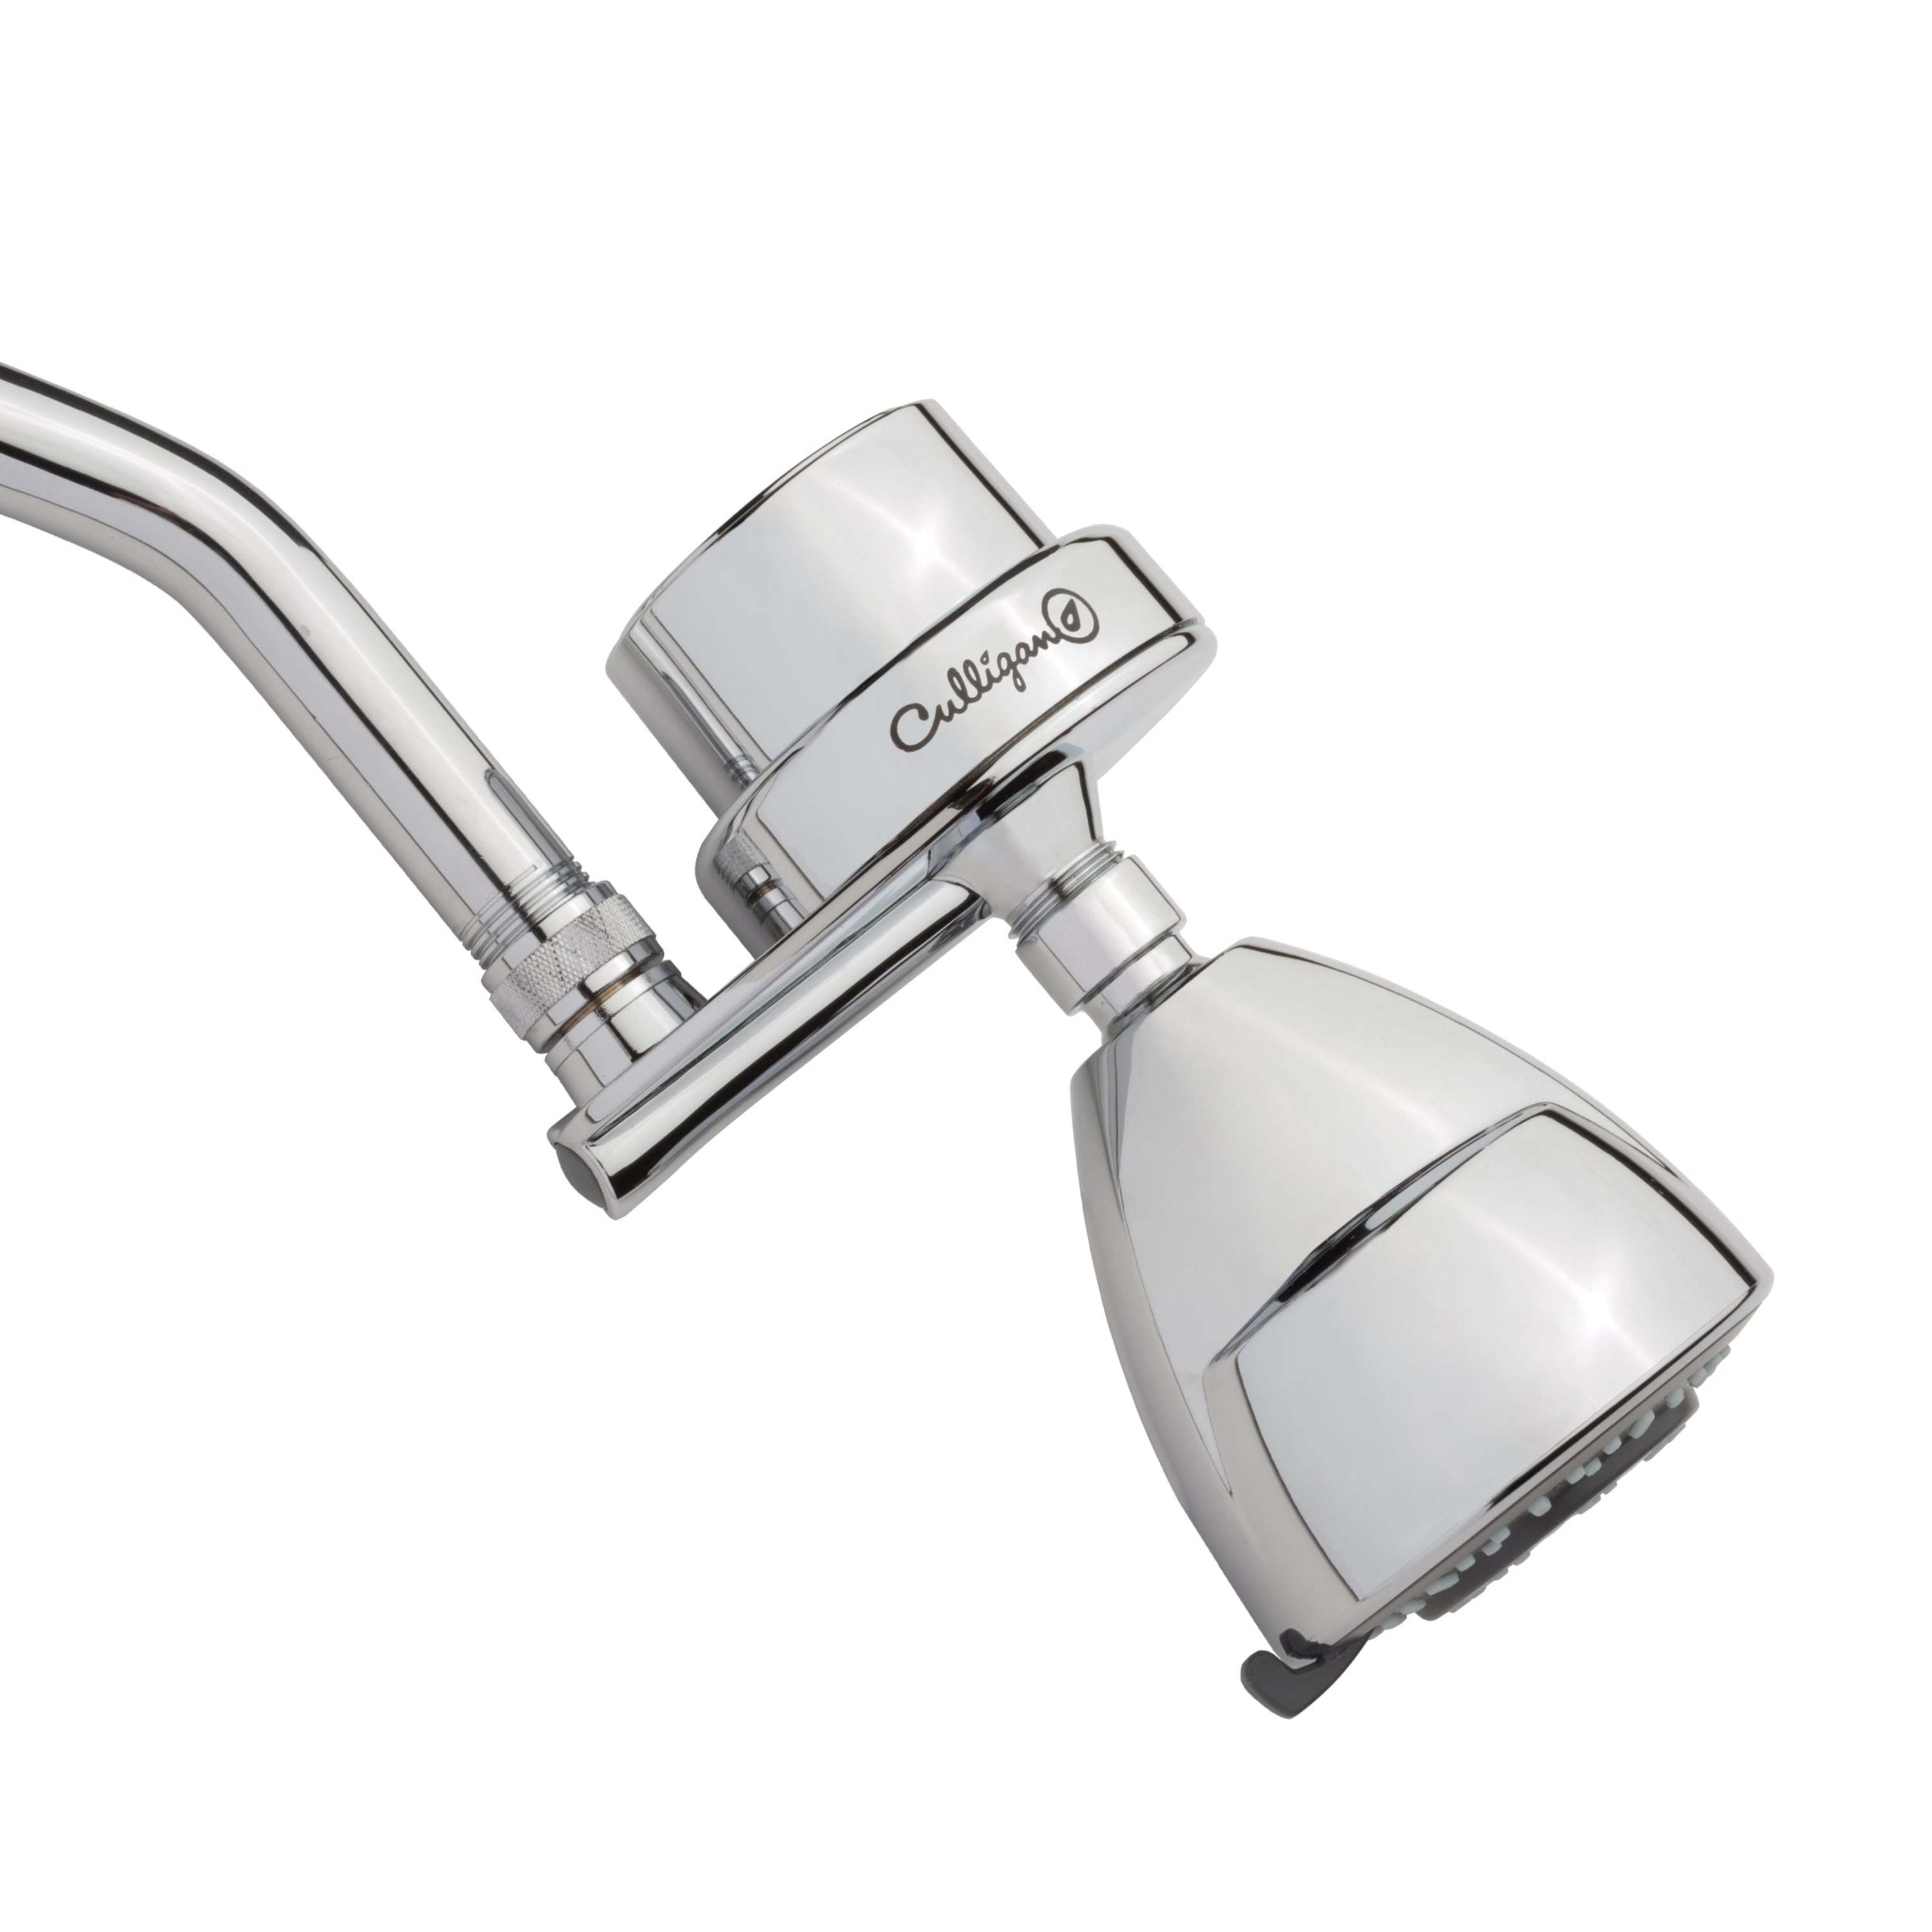 Culligan Ish-200C In-Line Shower Filter - Chrome - image 1 of 2